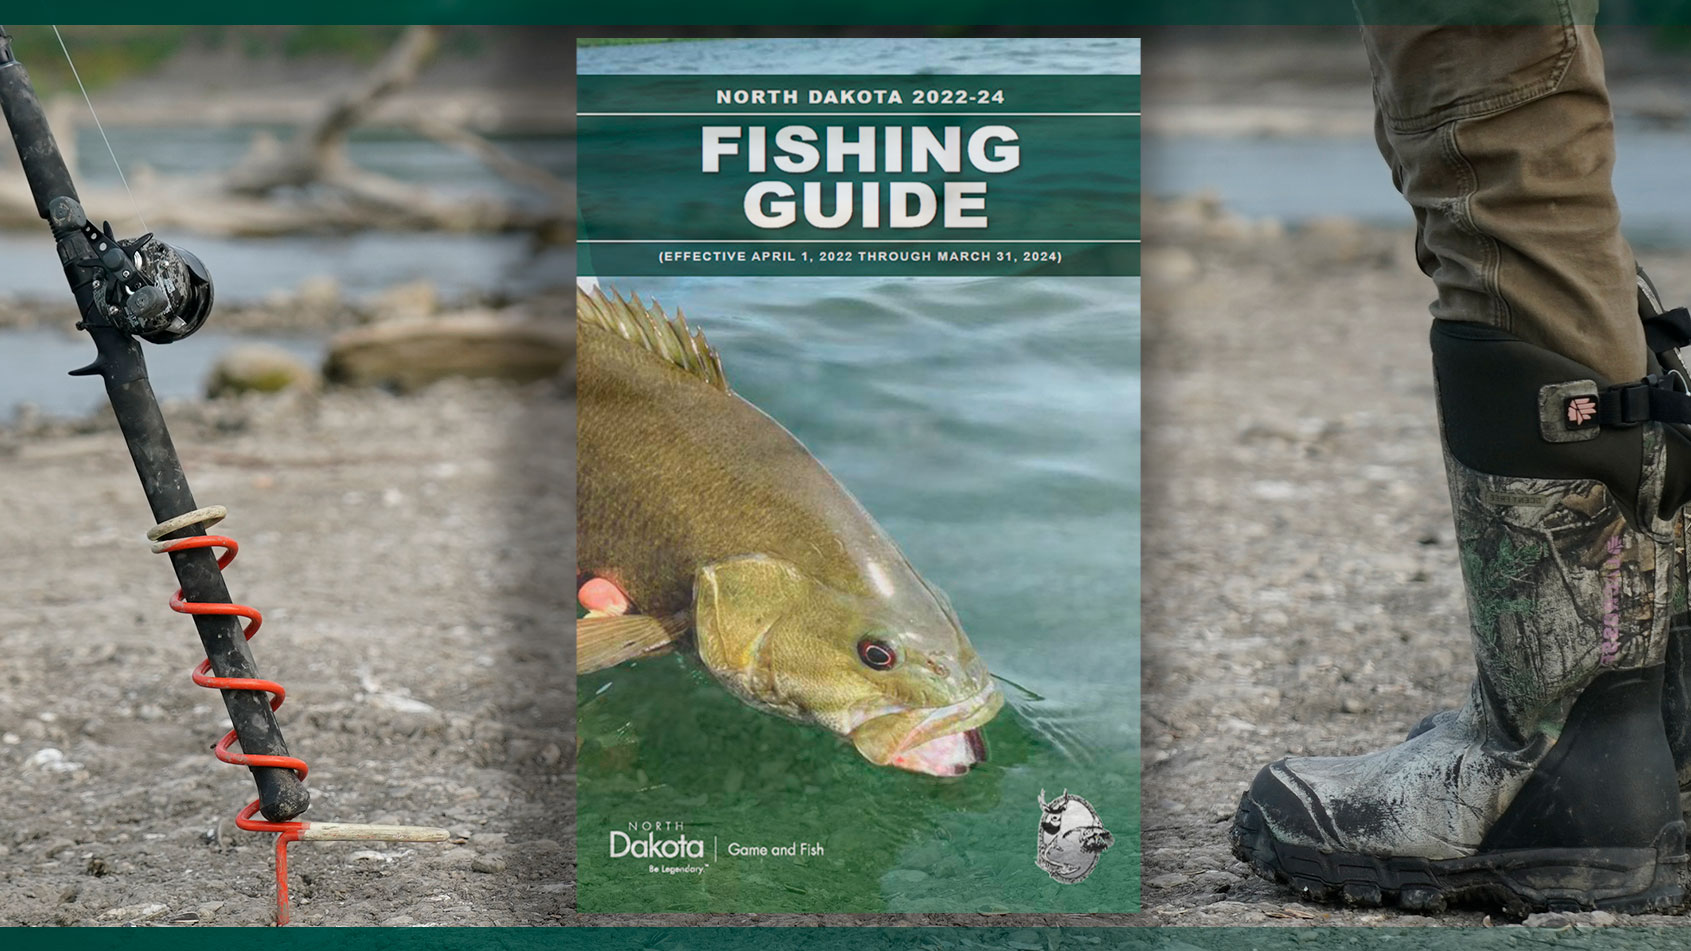 Fishing guide cover with angler and fishing pole in background